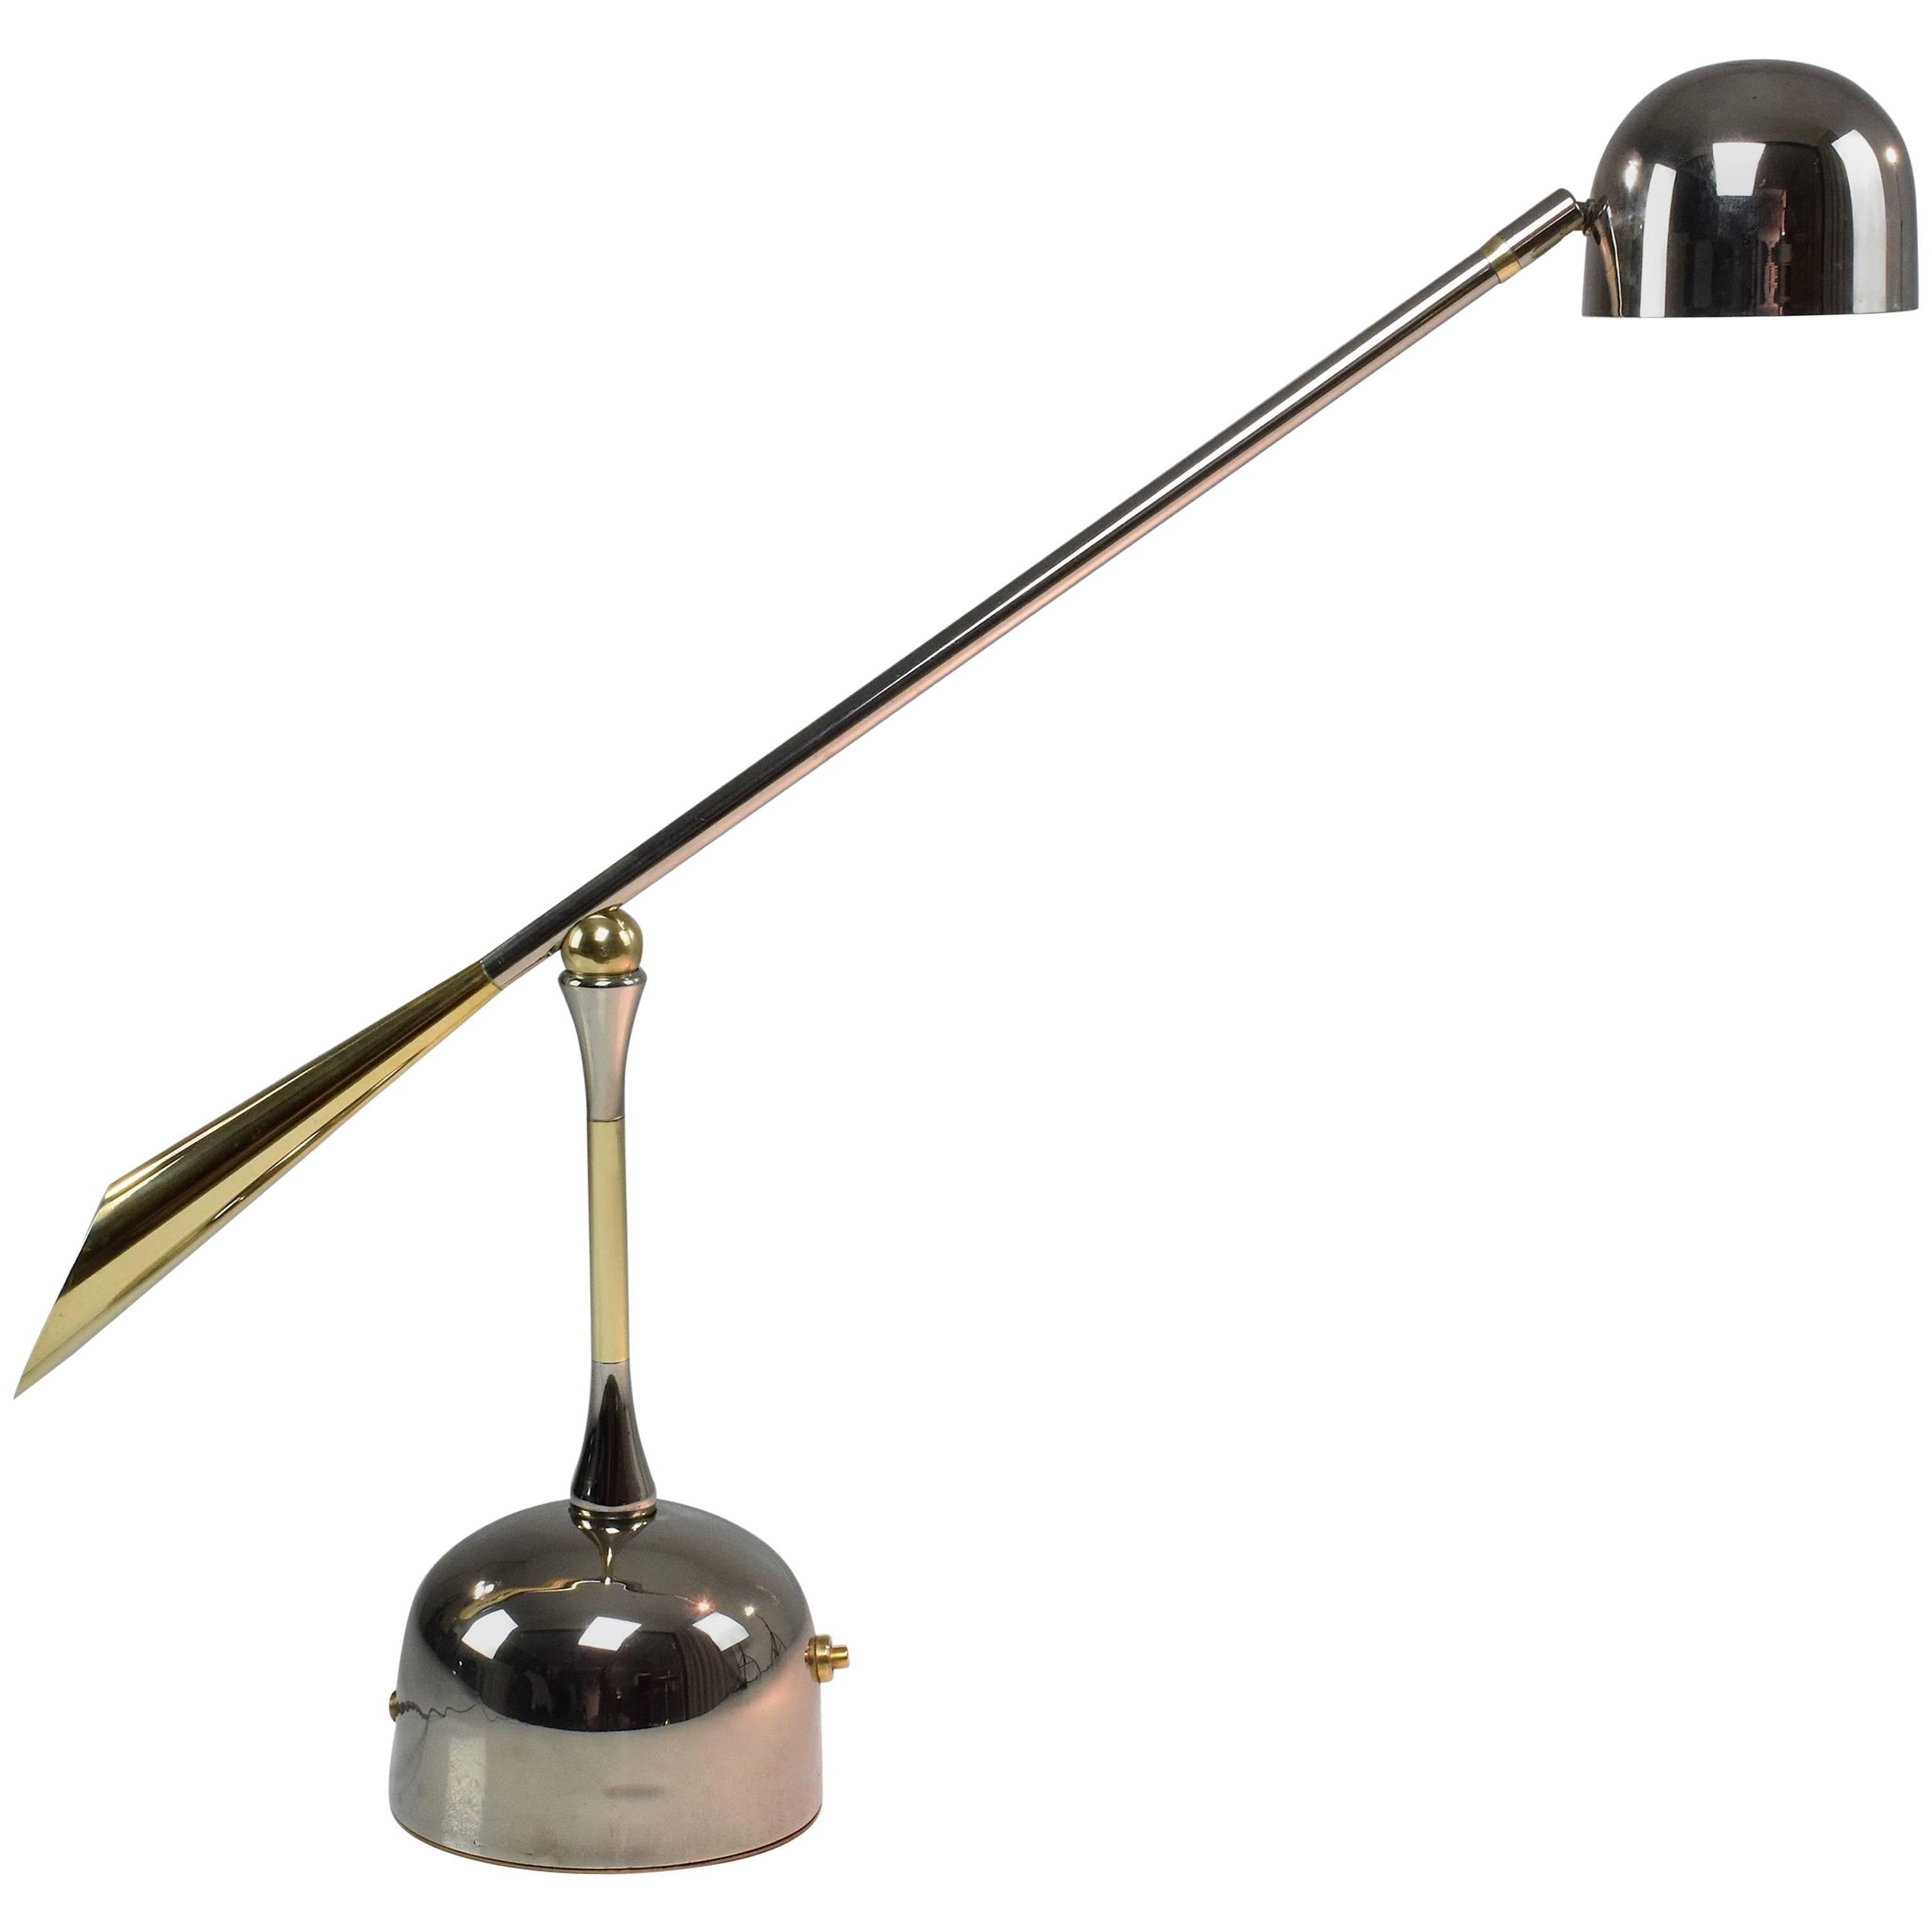 Contemporary handcrafted articulating desk or accent lamp composed of a solid nickel plated brass structure and designed with polished brass finishes and a unique rotatable pear-shaped joint. This piece rotates around three axis: the shade, the arm,